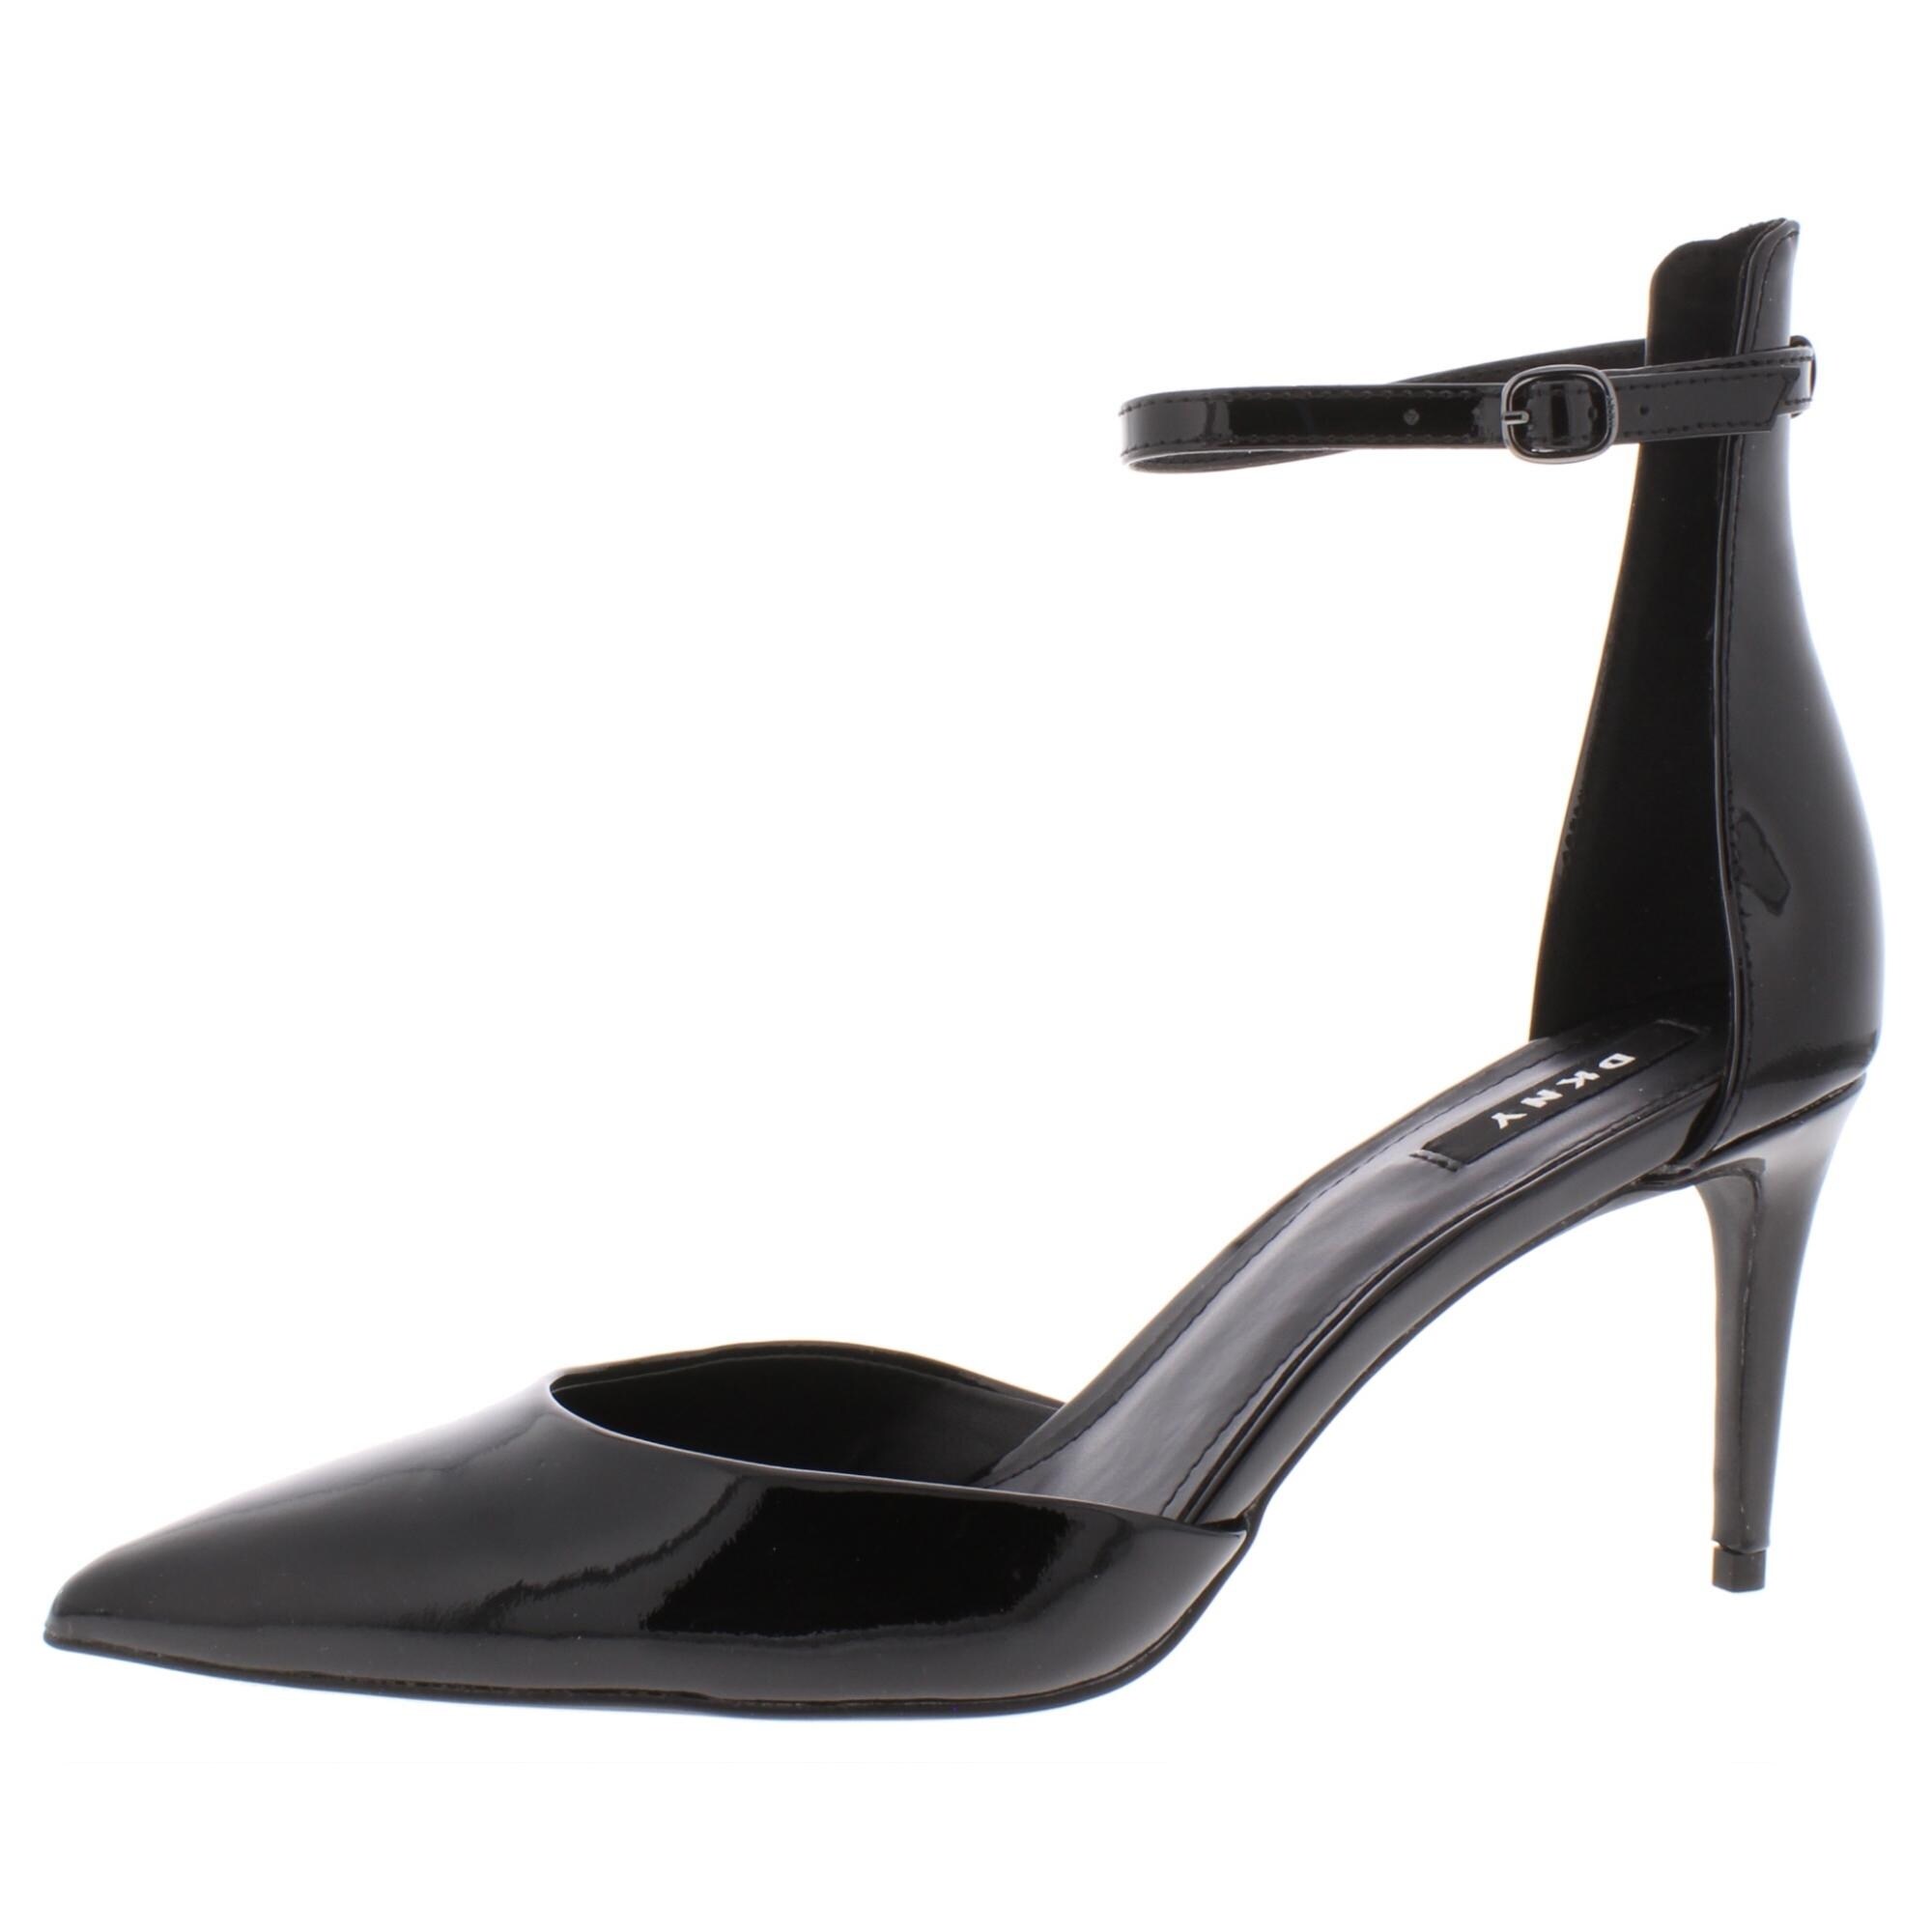 DKNY Womens Pumps Patent Leather Ankle 